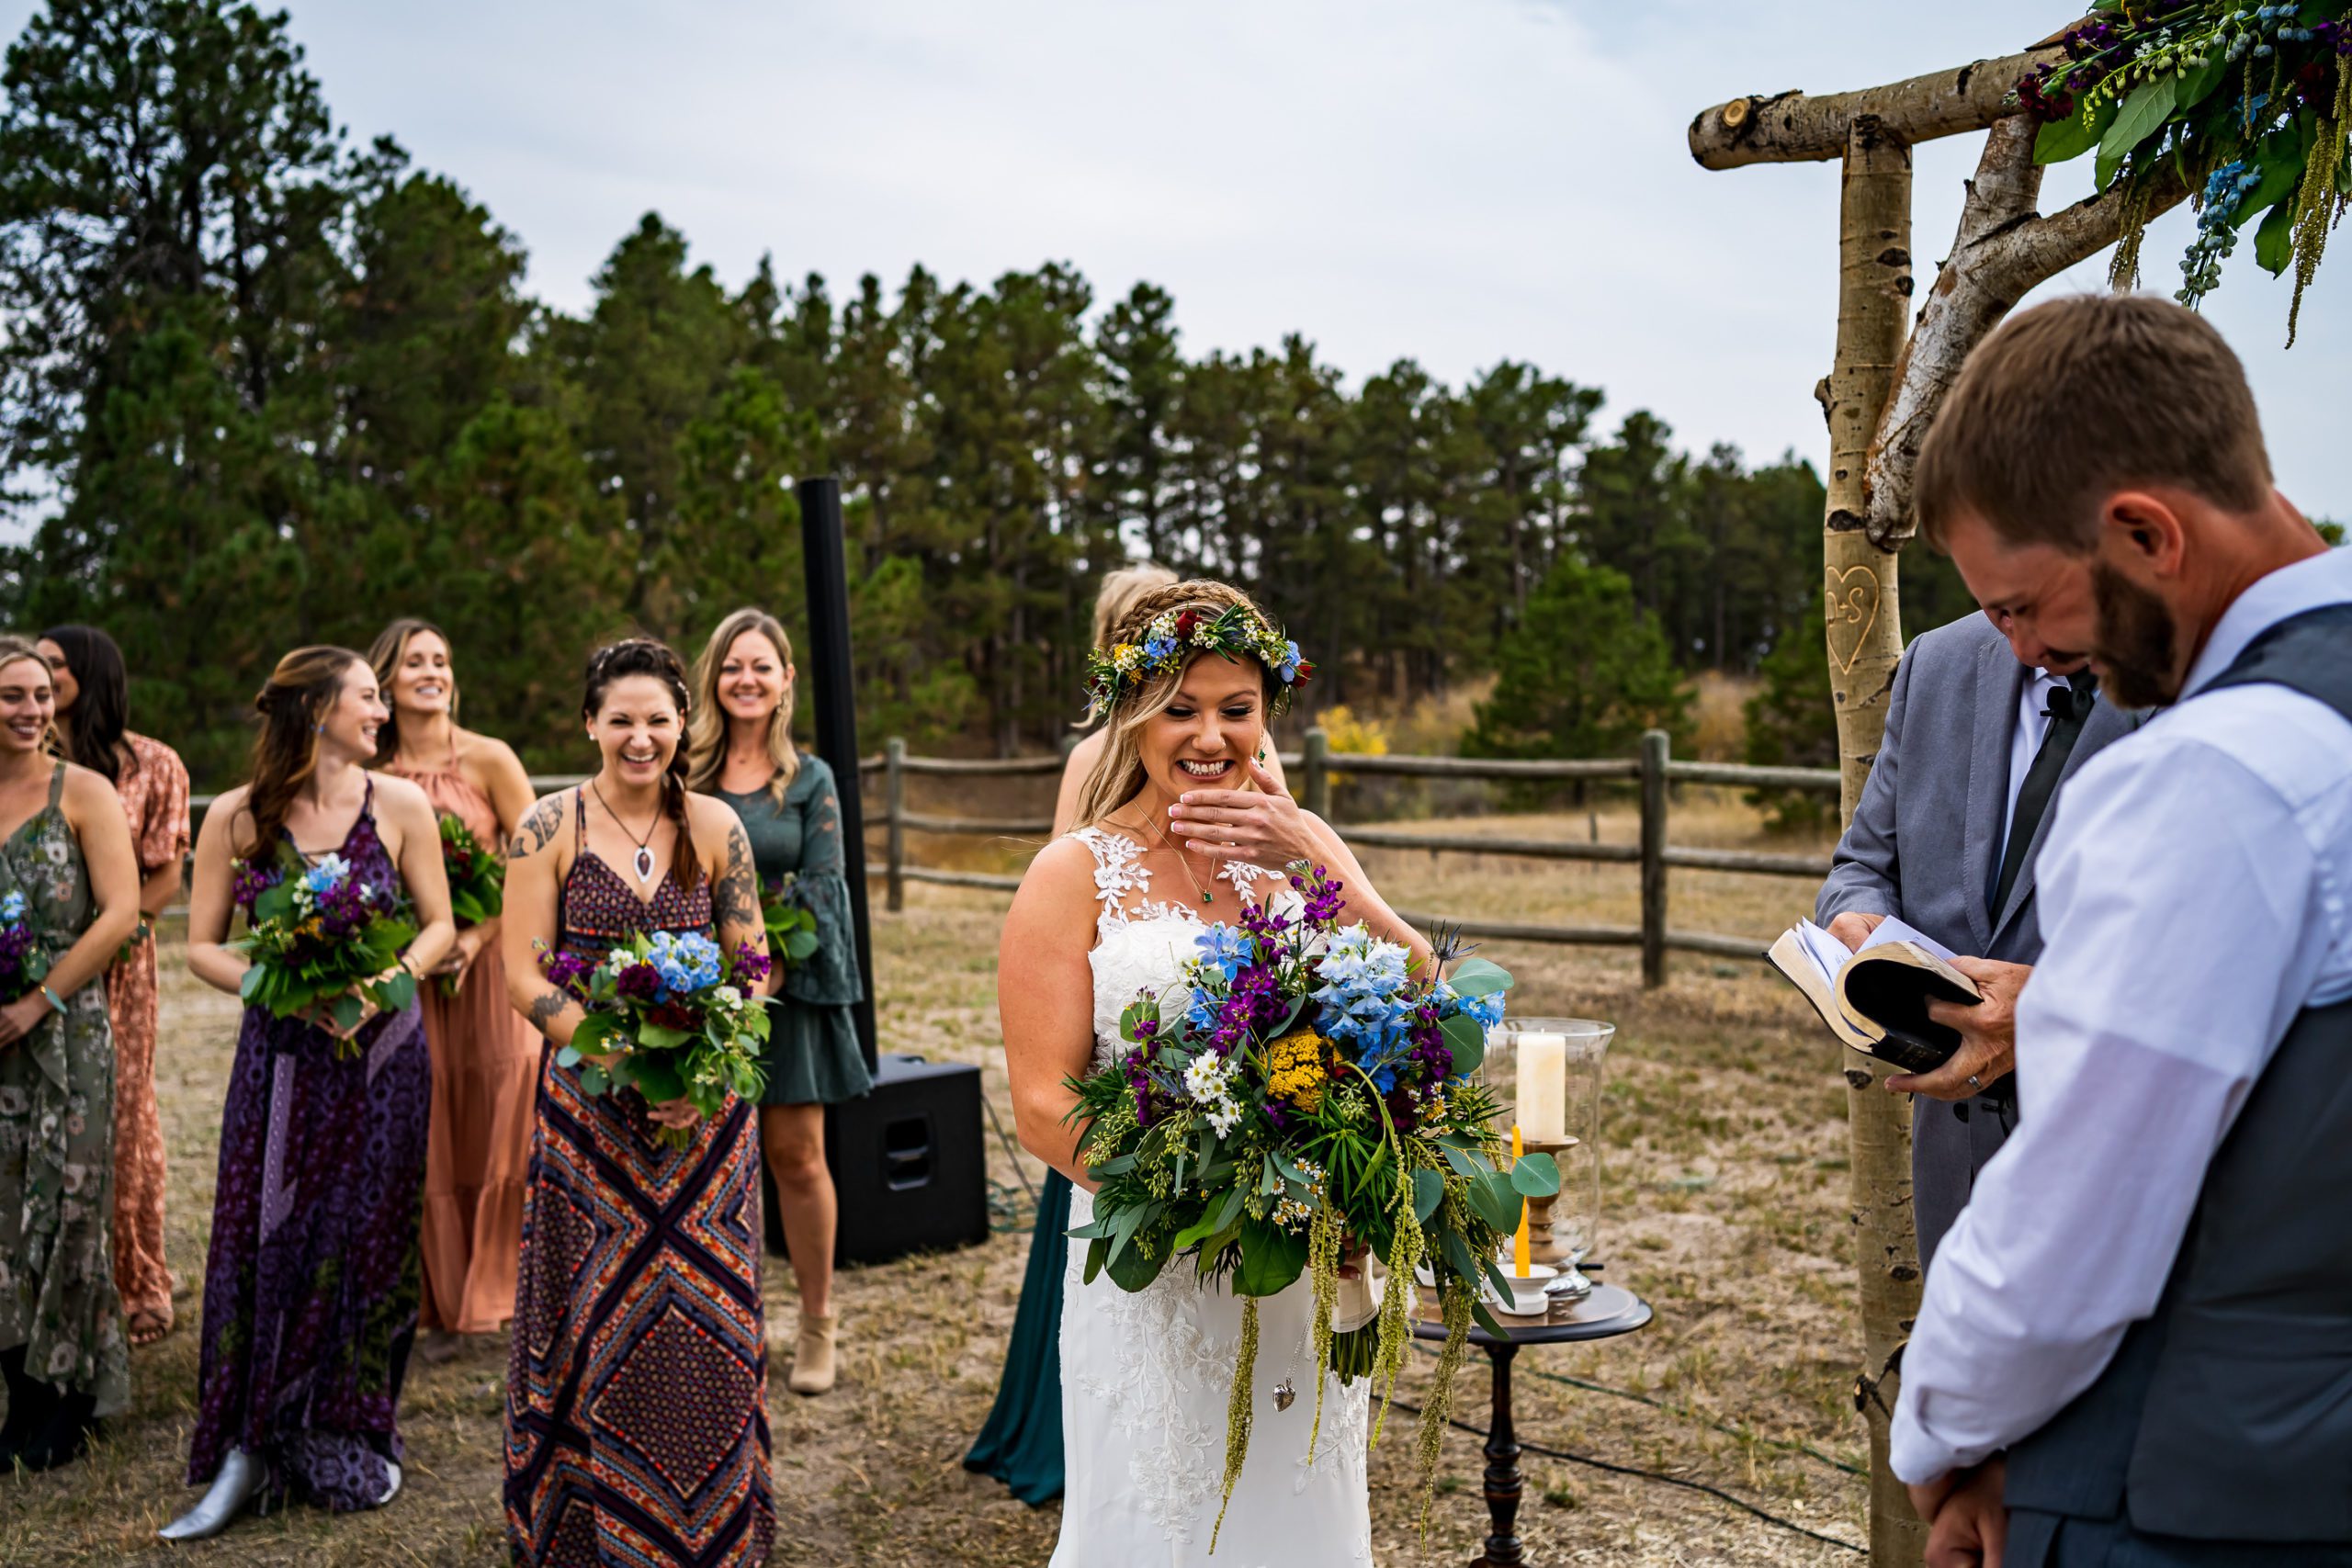 A bride stands in front of her bridesmaids holding a large bouquet of blue and yellow flowers at her Colorado backyard wedding.